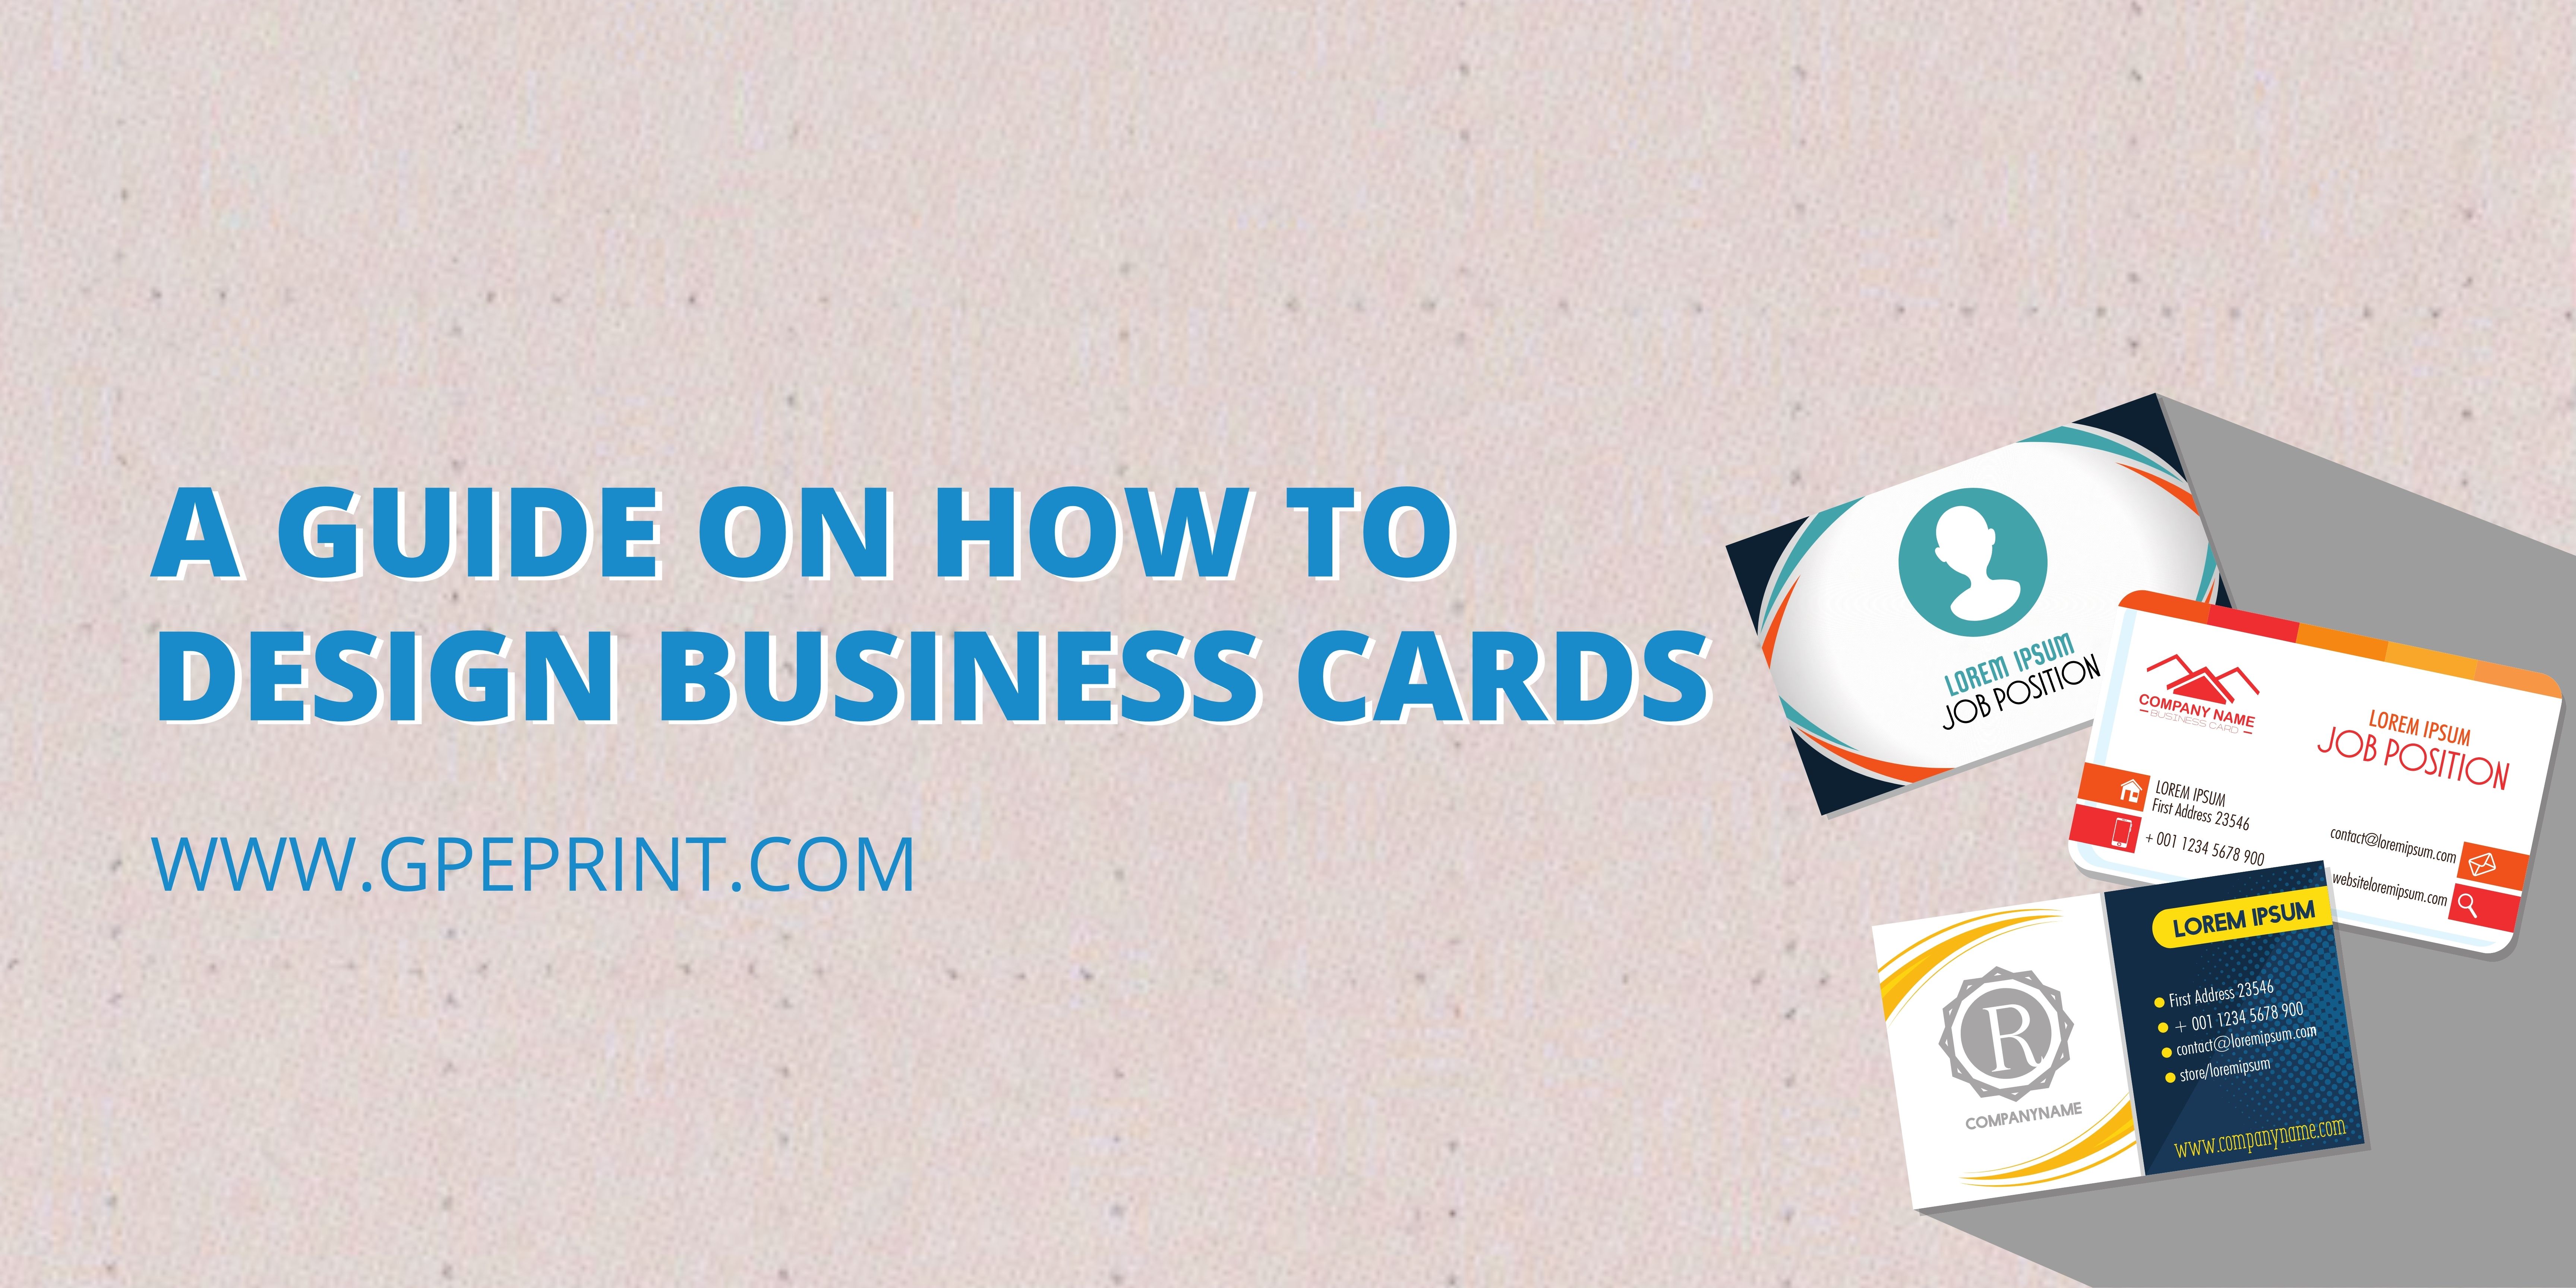 How to Design Business Cards: A Guide